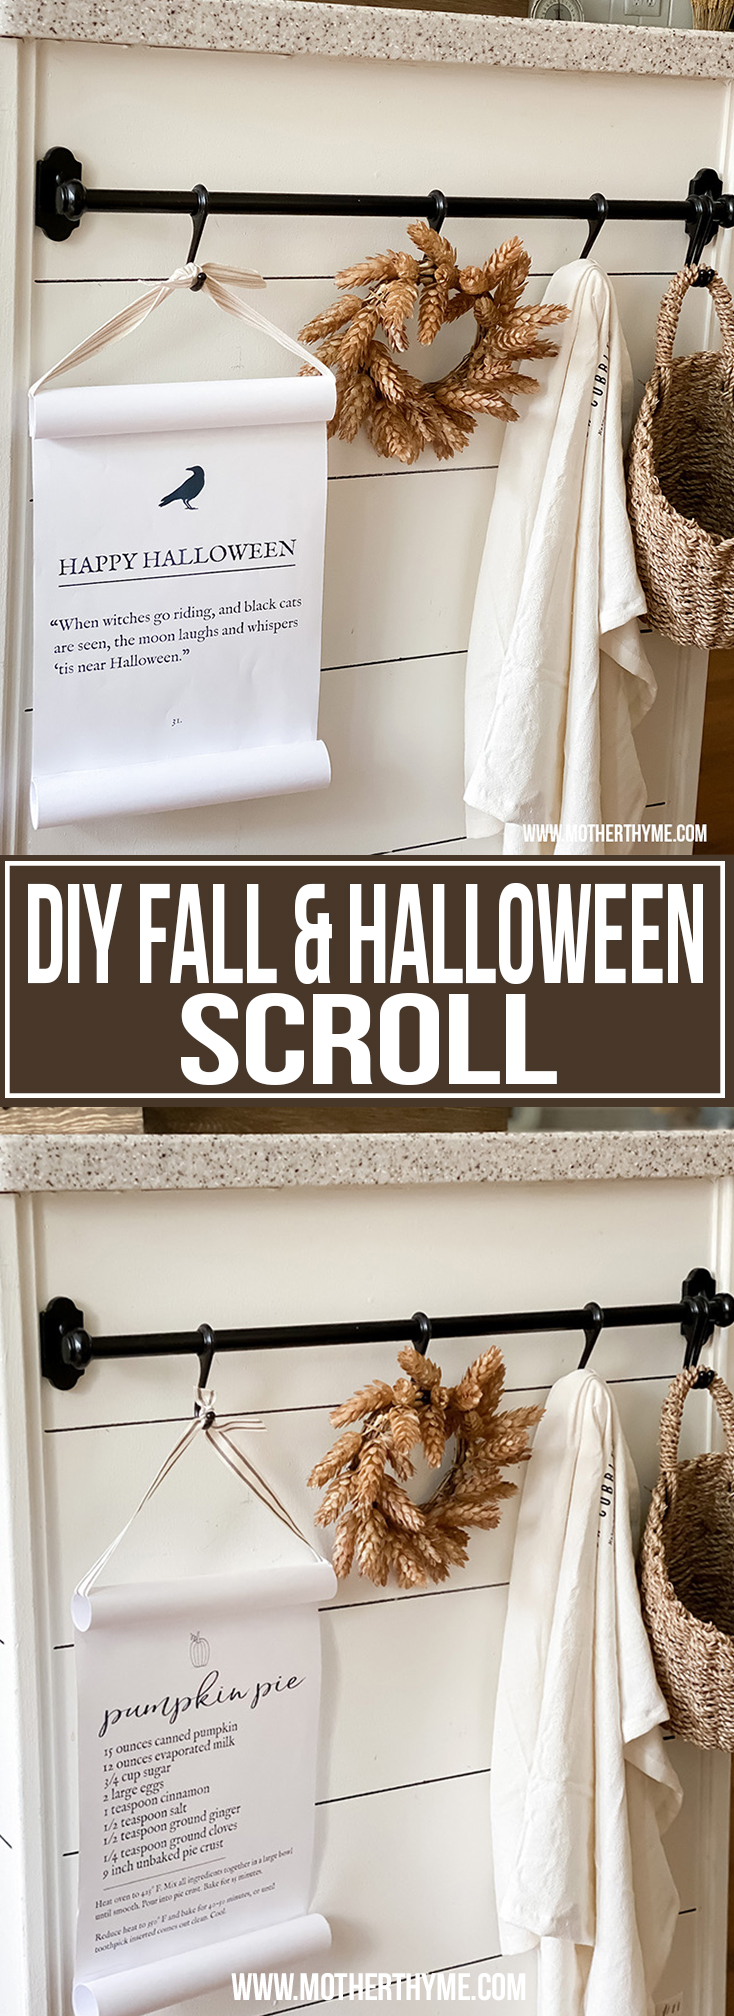 FALL AND HALLOWEEN SCROLL - FREE PRINTABLES